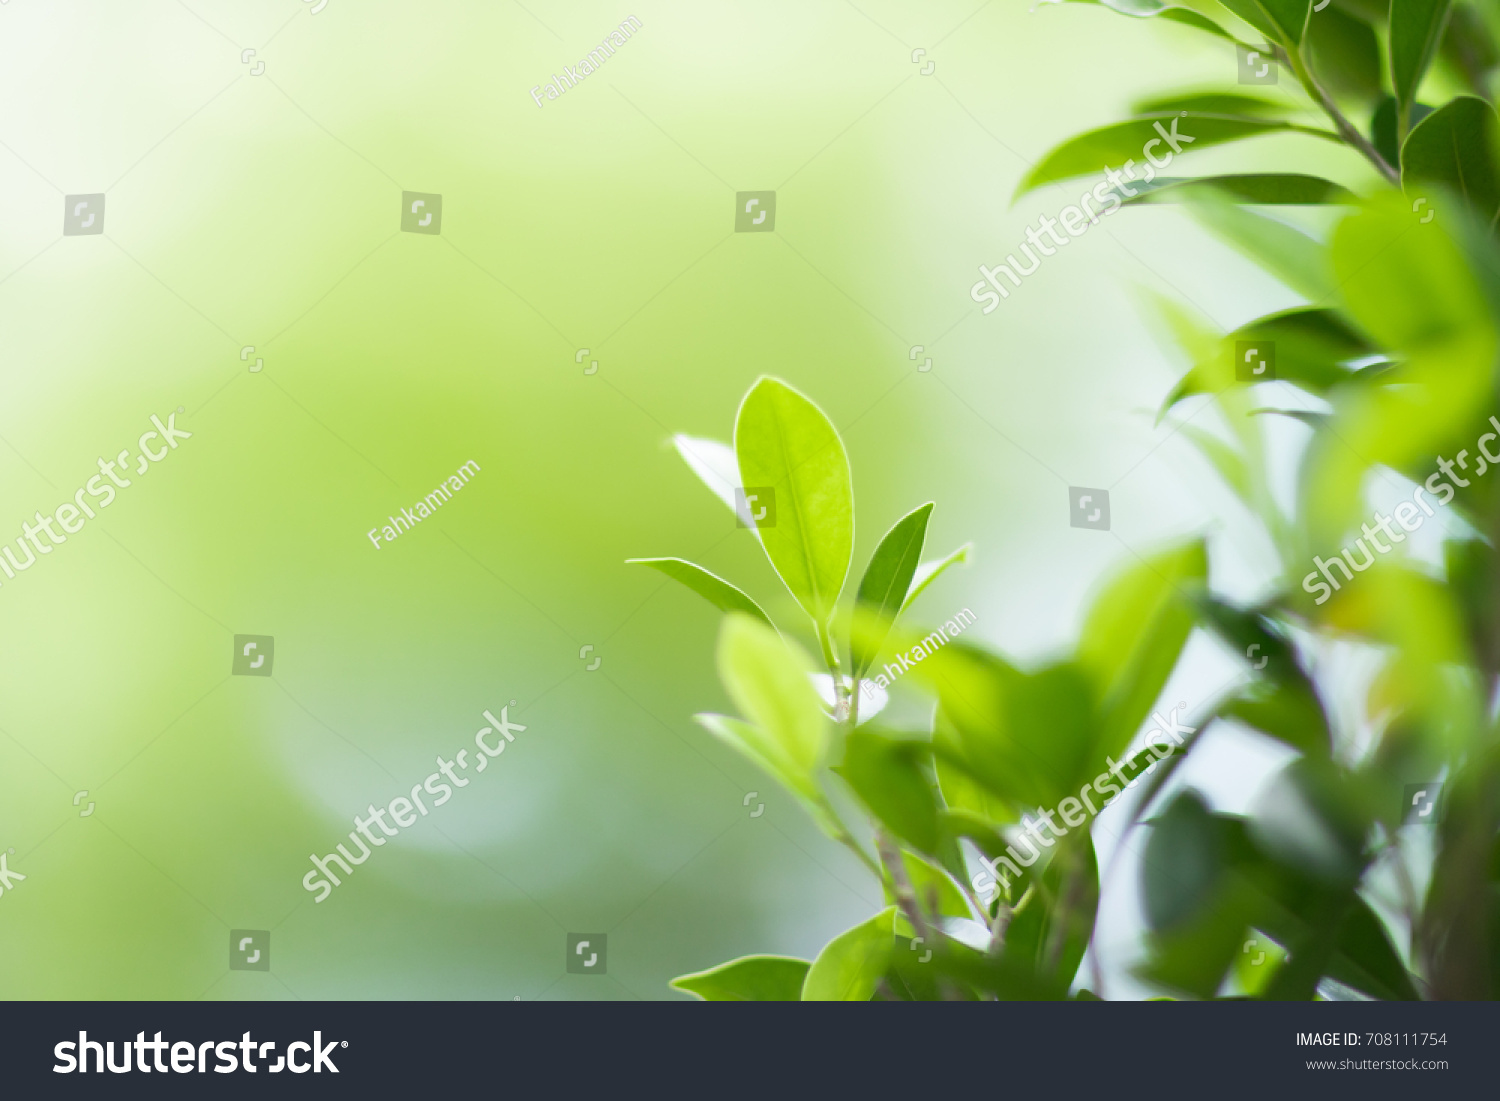 Nature of green leaf in garden at summer. Natural green leaves plants using as spring background cover page environment ecology or greenery wallpaper #708111754